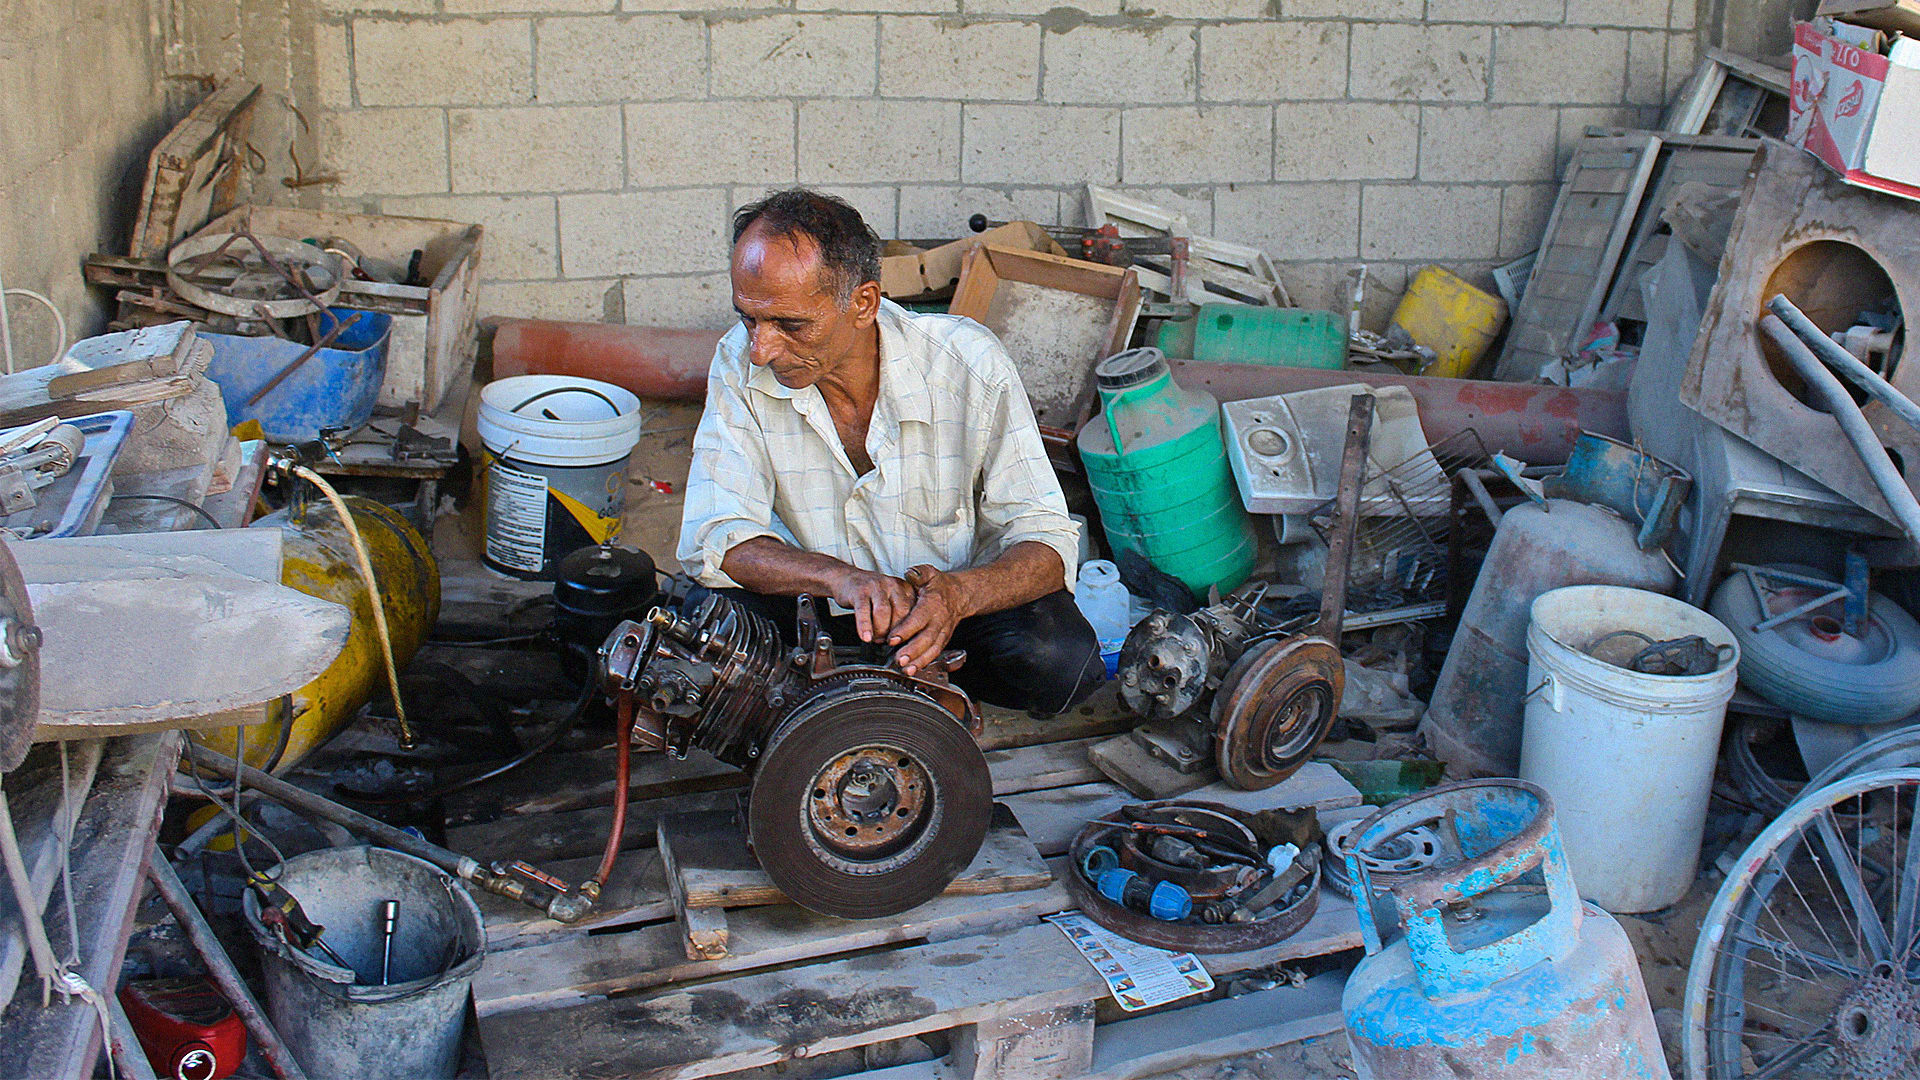 The DIY Inventors Finding Ways To Make Small Improvements To Life In Gaza